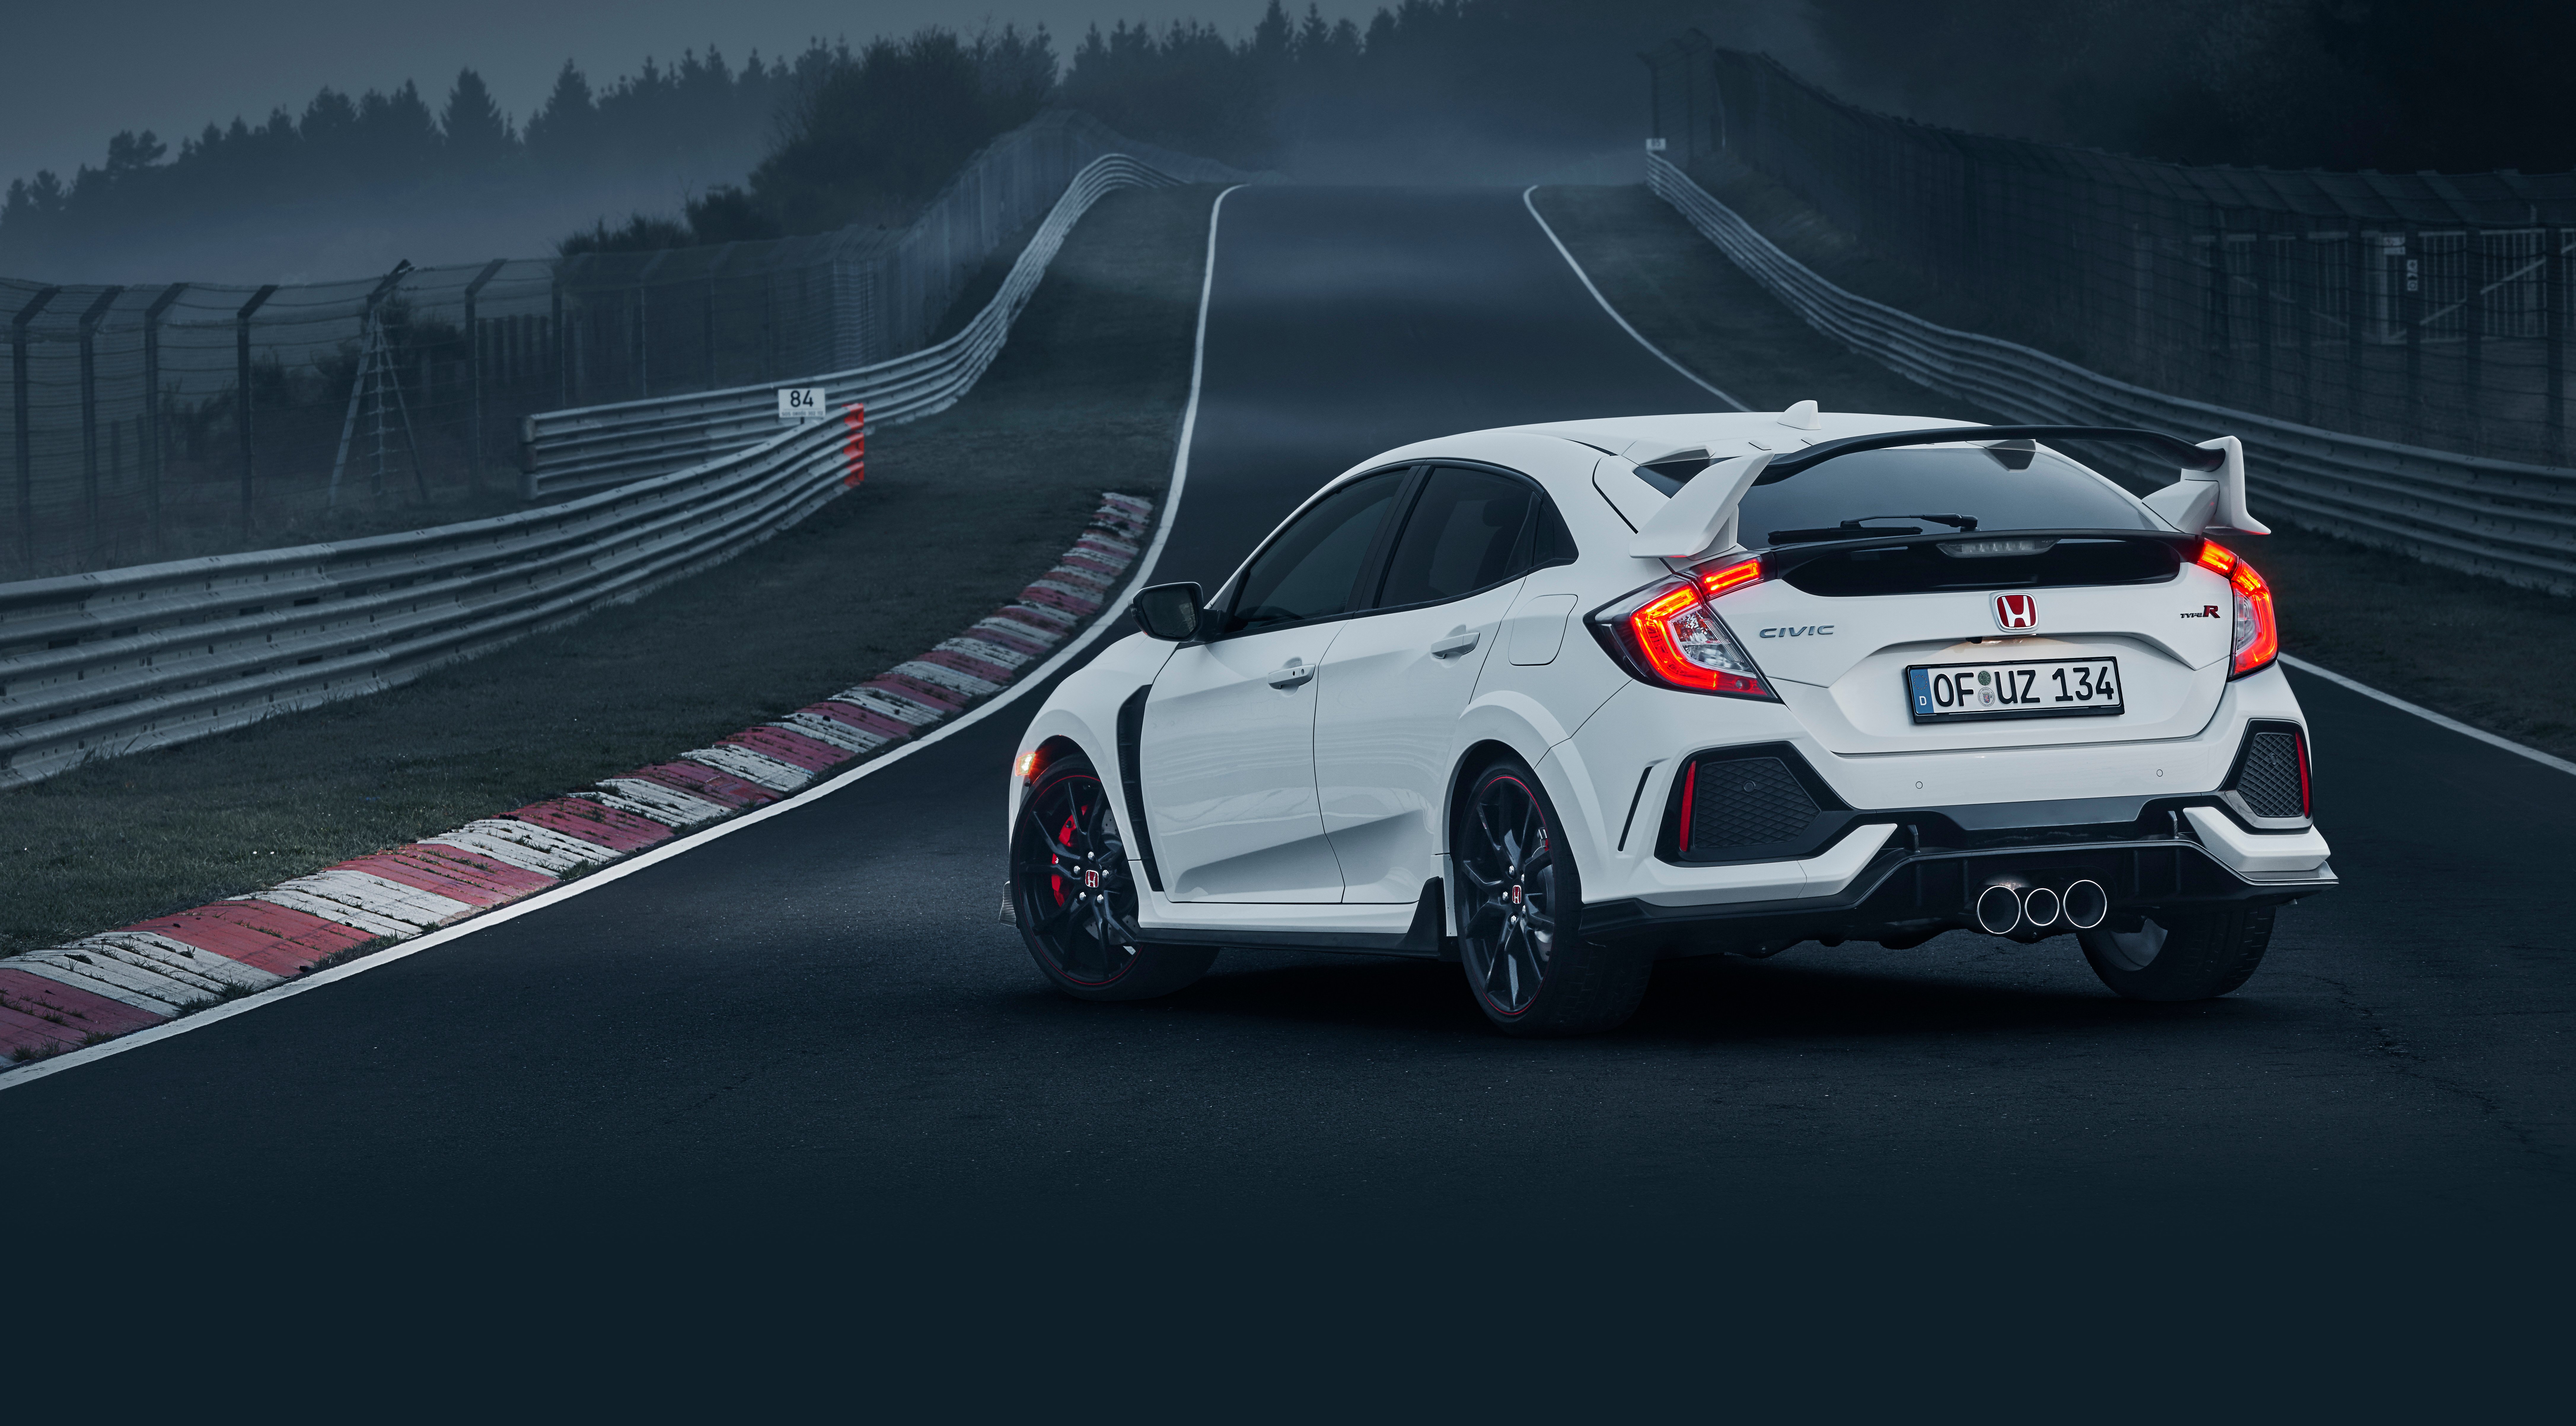 2018 Honda Civic Type R Pricing And Specs Photos Caradvice